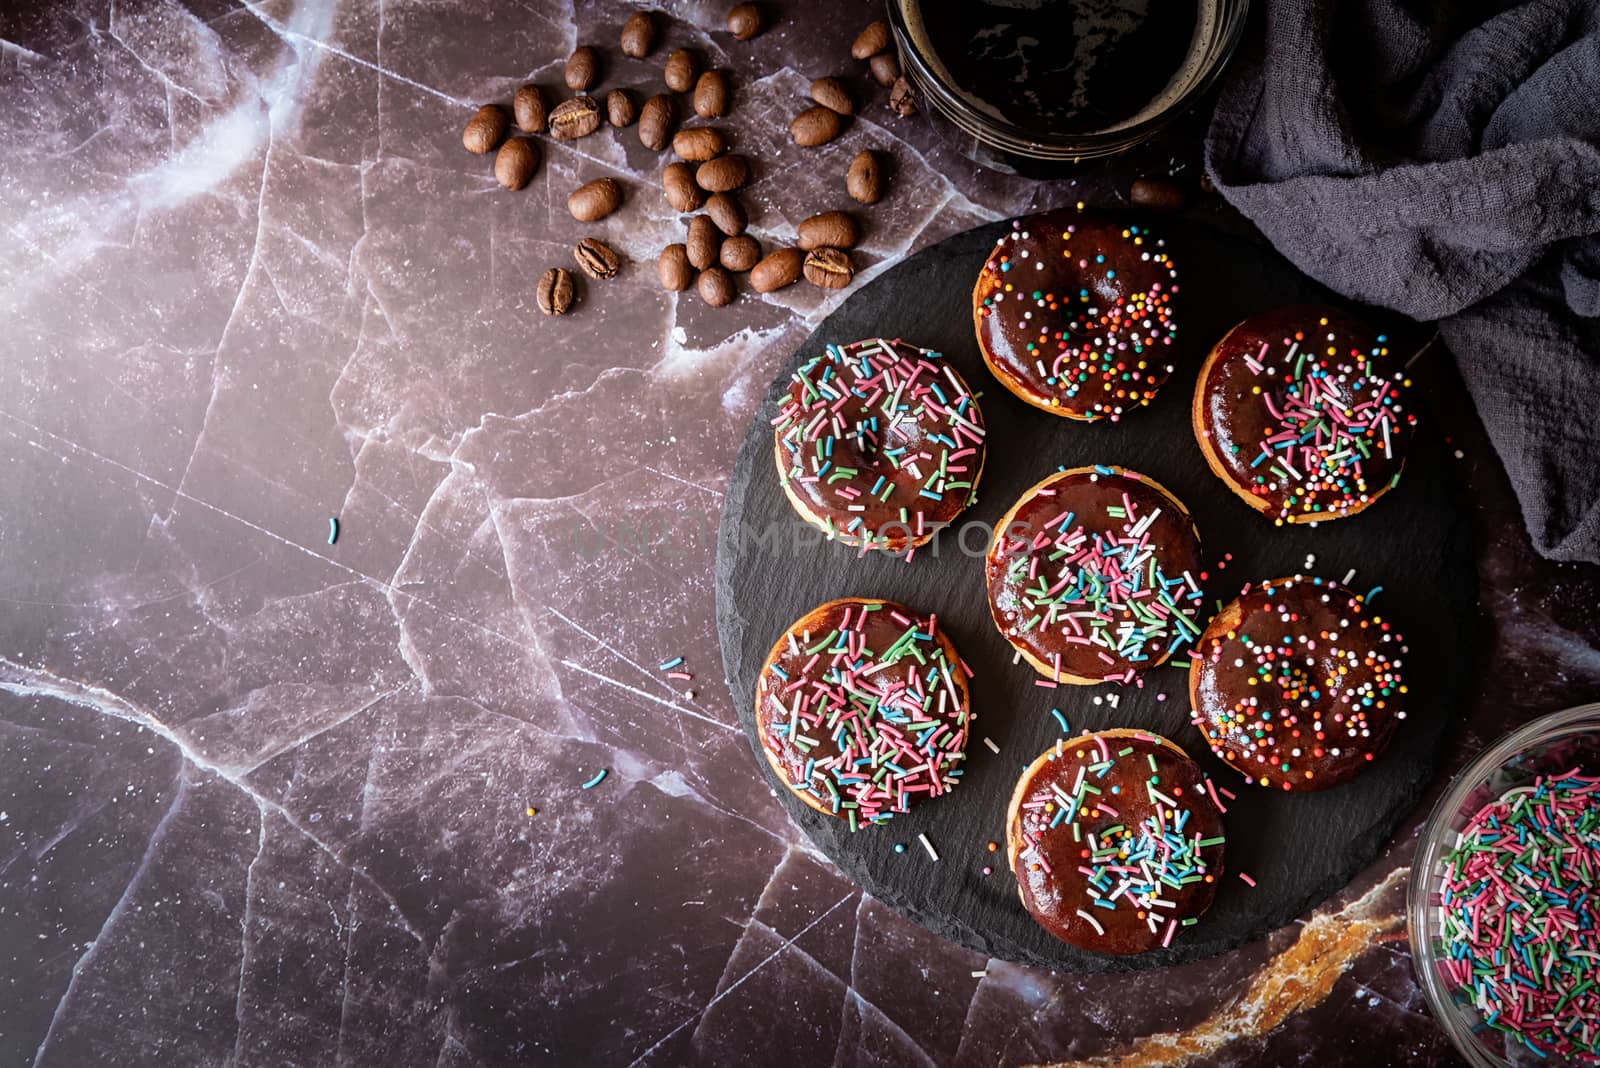 Fresh donuts with chocolate glaze and colorful sprinkles on dark background by Desperada